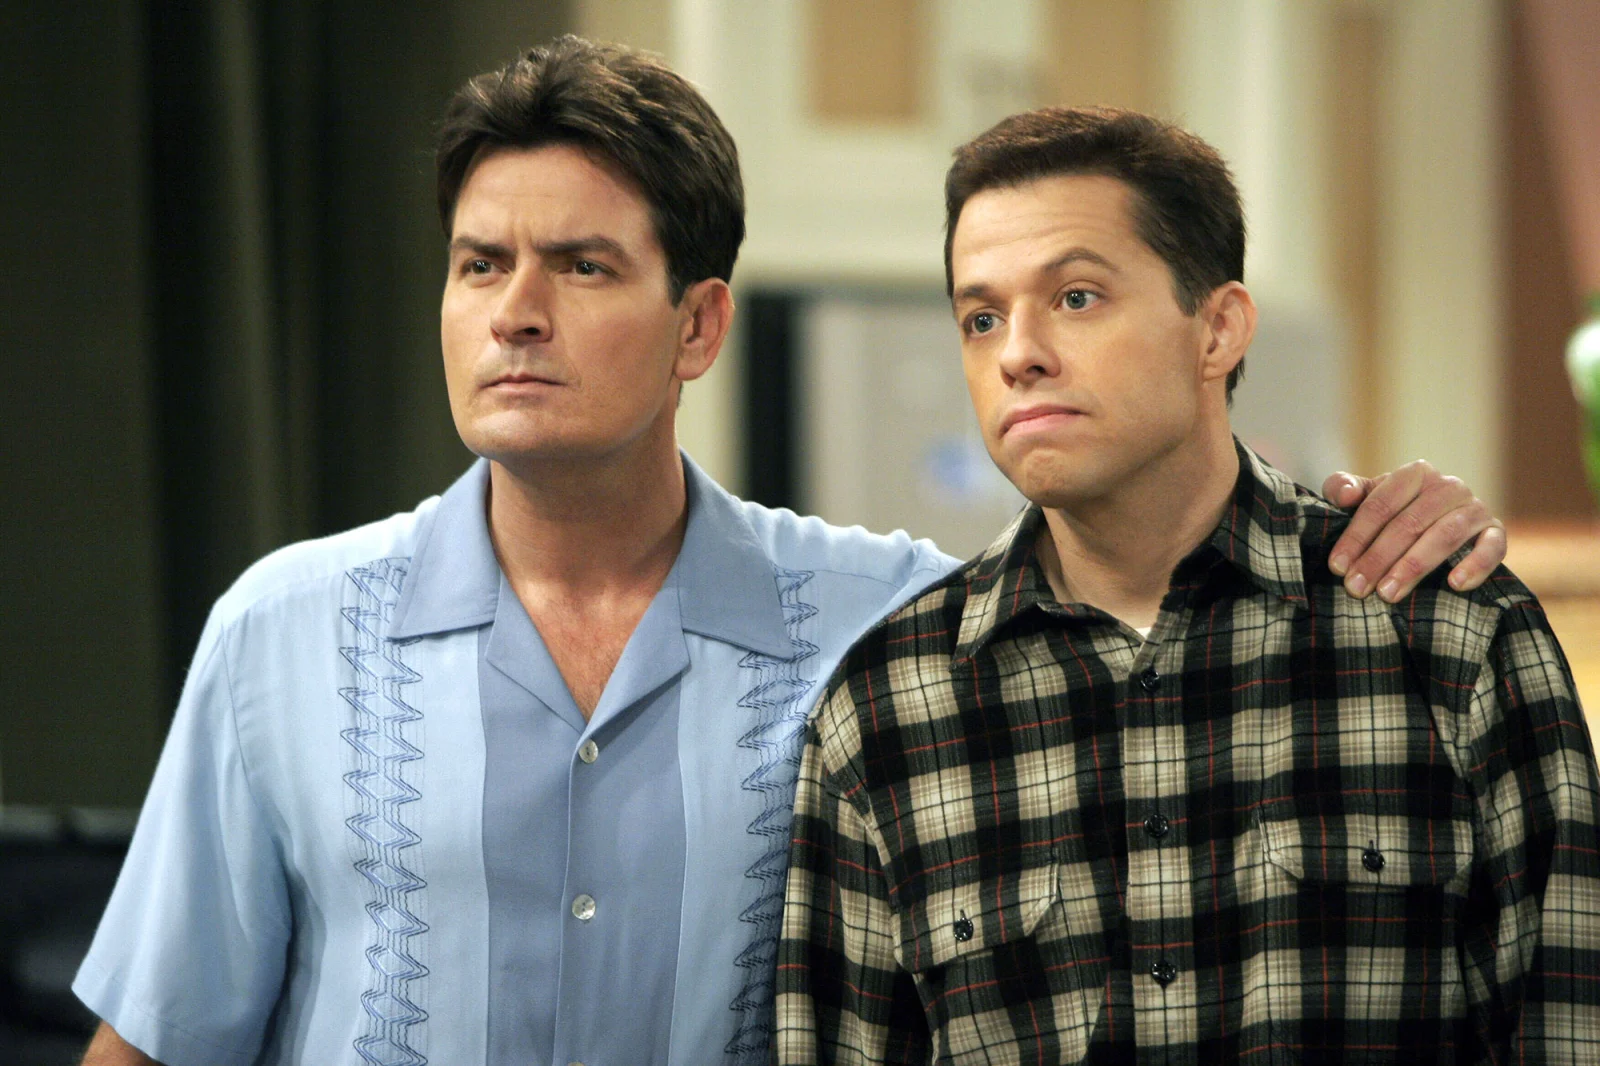 Charlie Sheen and Jon Cryer in Two and a Half Men